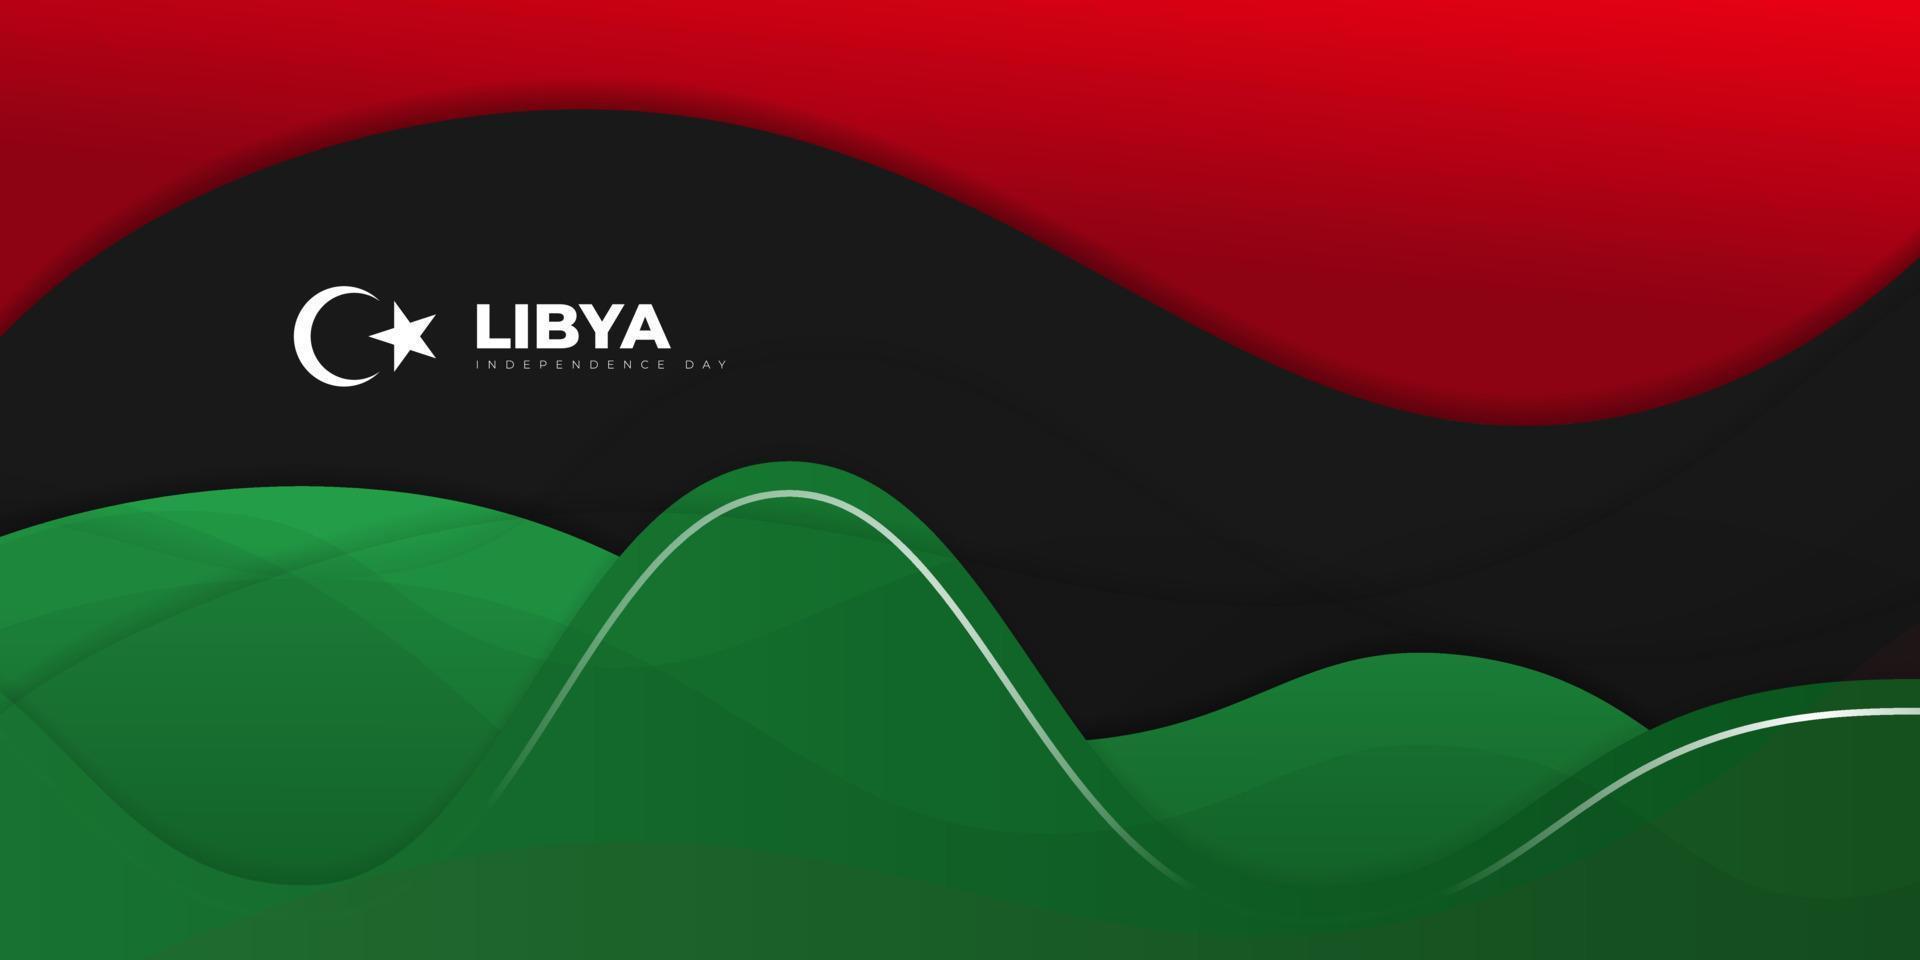 Wavy Red, black and Green background design. Libya Independence day template design. vector